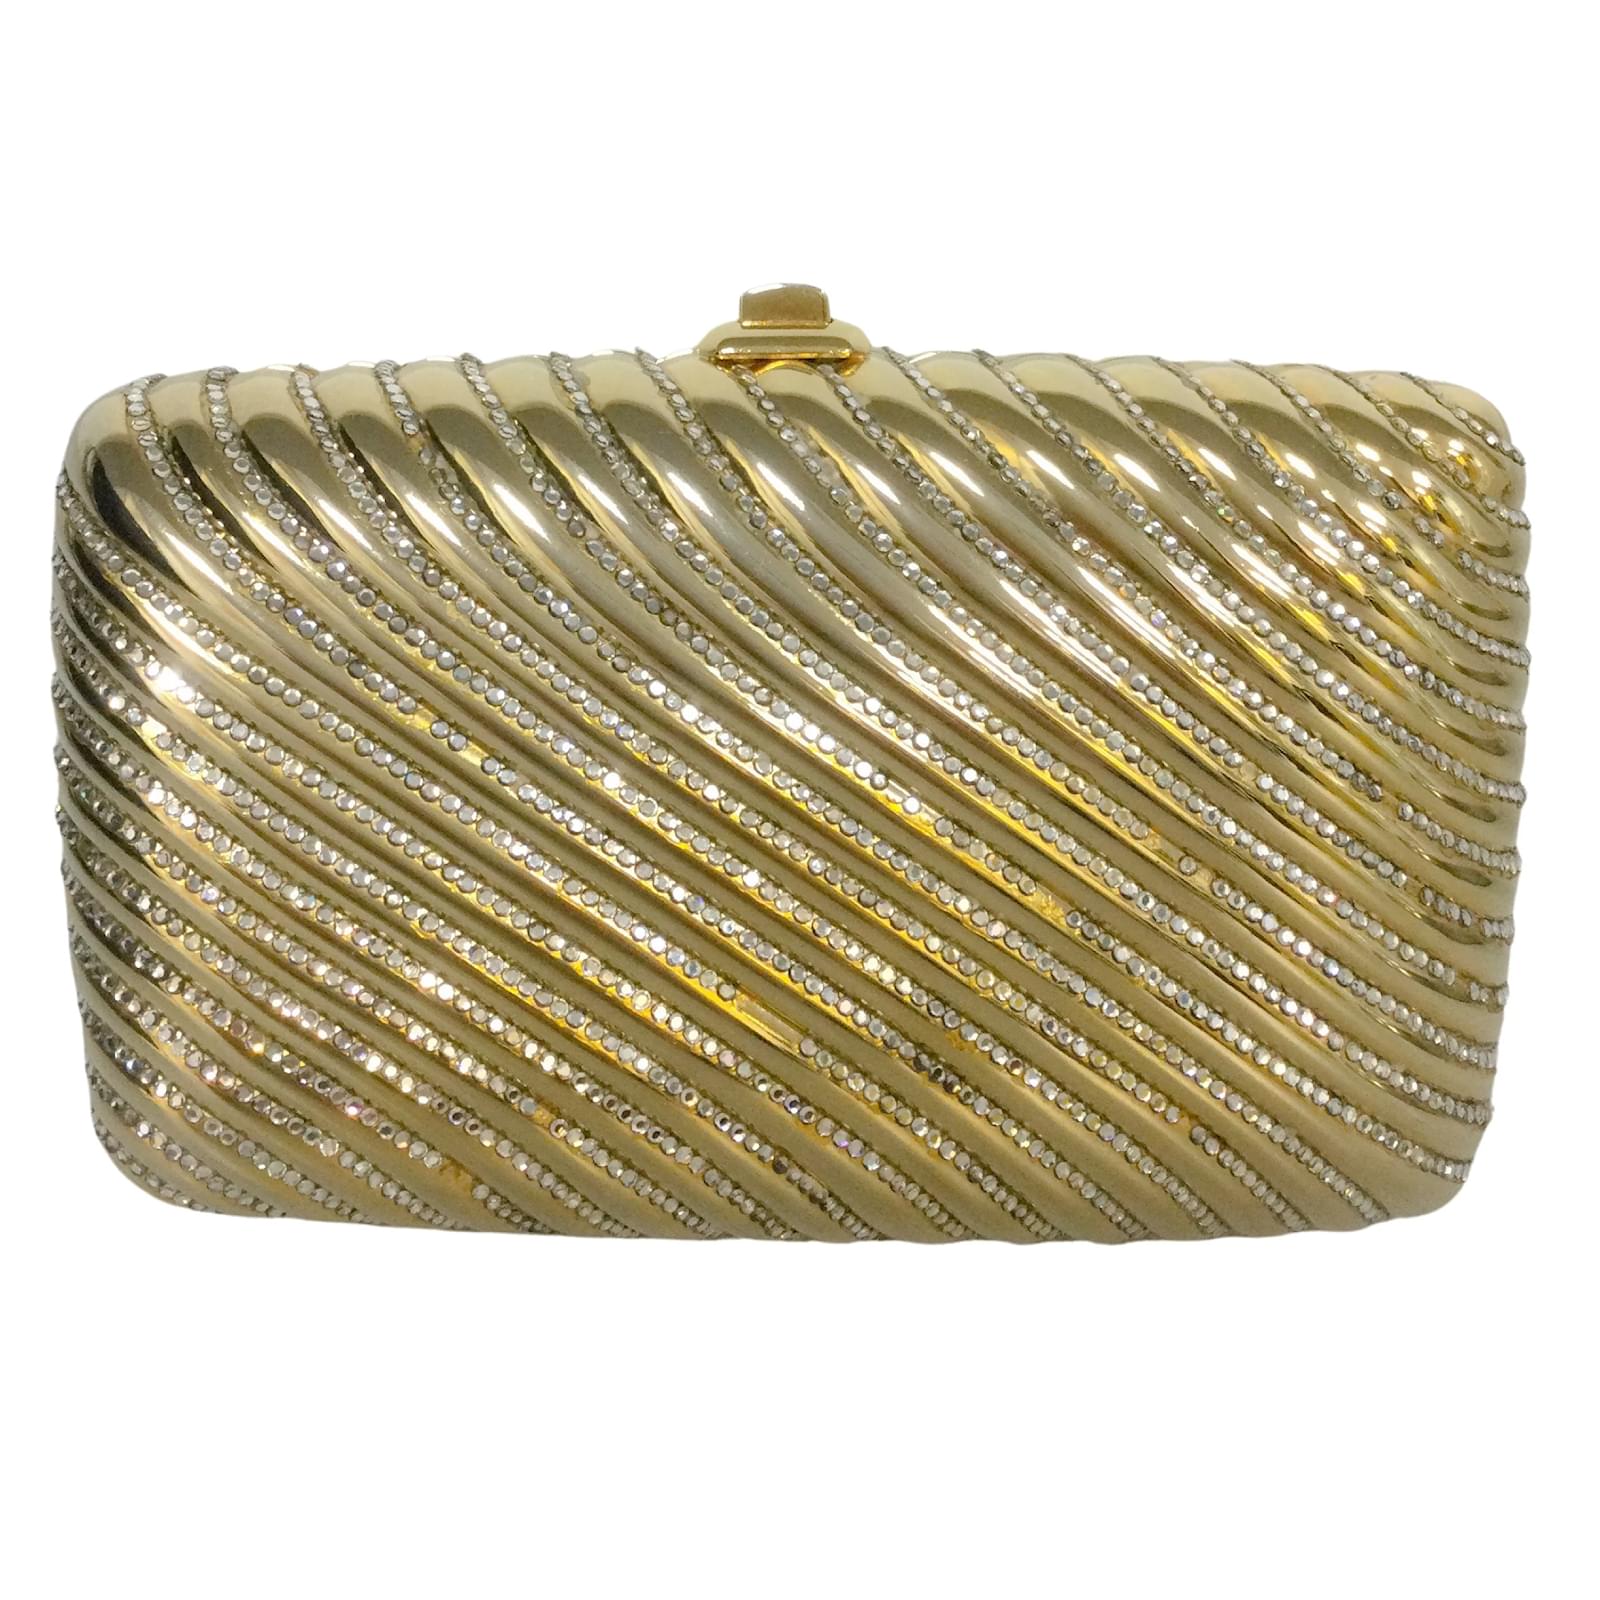 Rhinestone Embellished Clutch Purse Evening Bag with Chain Strap - Gold Iridescent